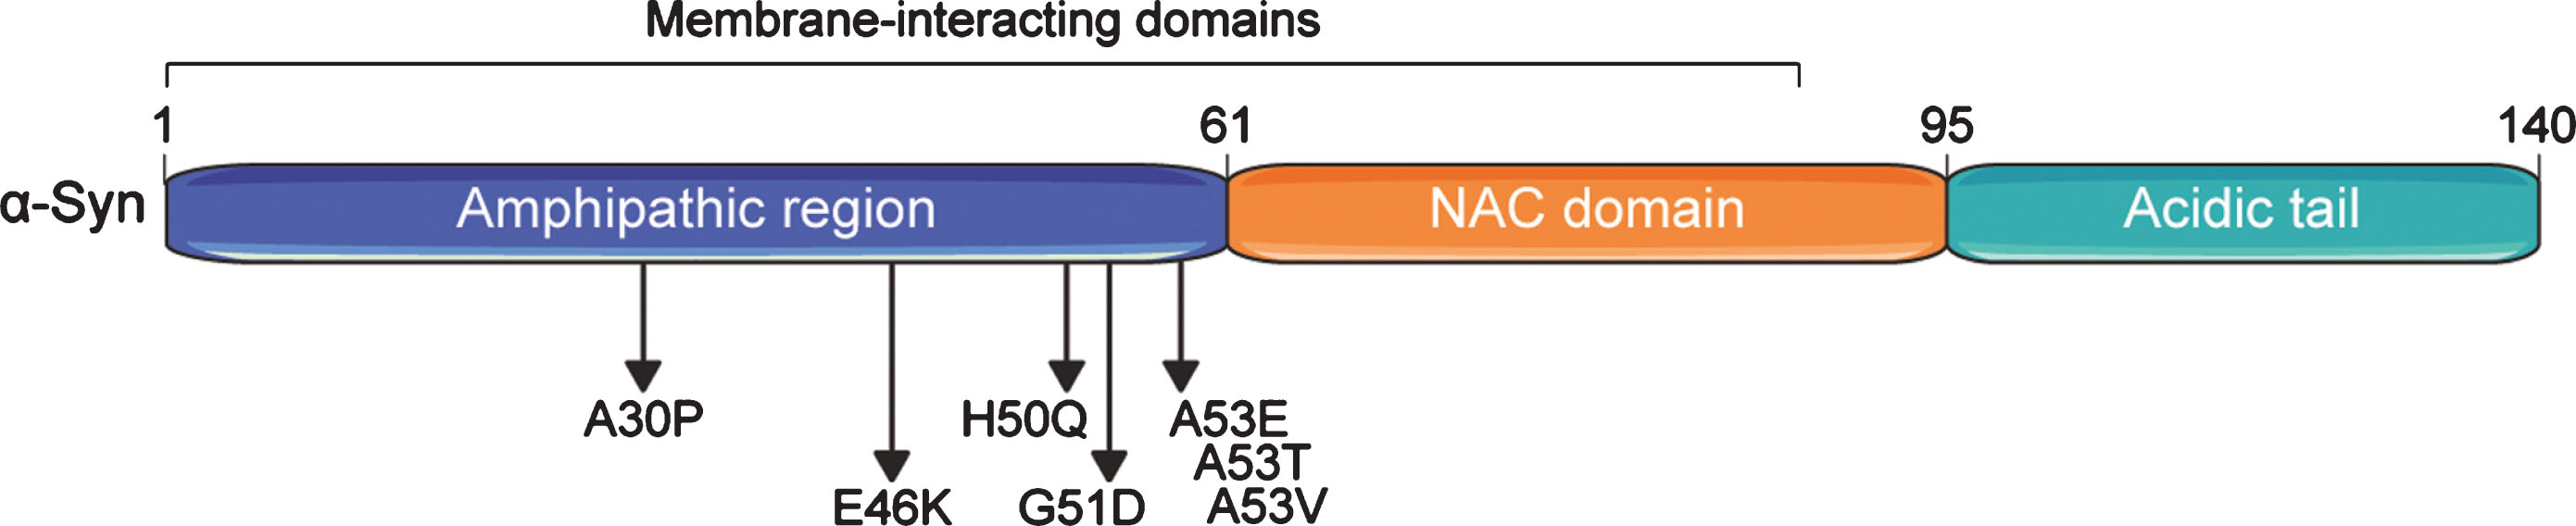 Domain structure of the human alpha-synuclein (α-Syn) protein. α-Syn comprises three basic domains: an N-terminal amphipathic region, a central non-β-amyloid component (NAC) domain, and a C-terminal acidic domain. Seven membrane-interacting amino acid motifs are also present in the first half of the protein. The region preceding the NAC domain concentrates all pathogenic α-Syn mutations identified so far. Numbers on the upper part of the structure refer to amino acid positions.